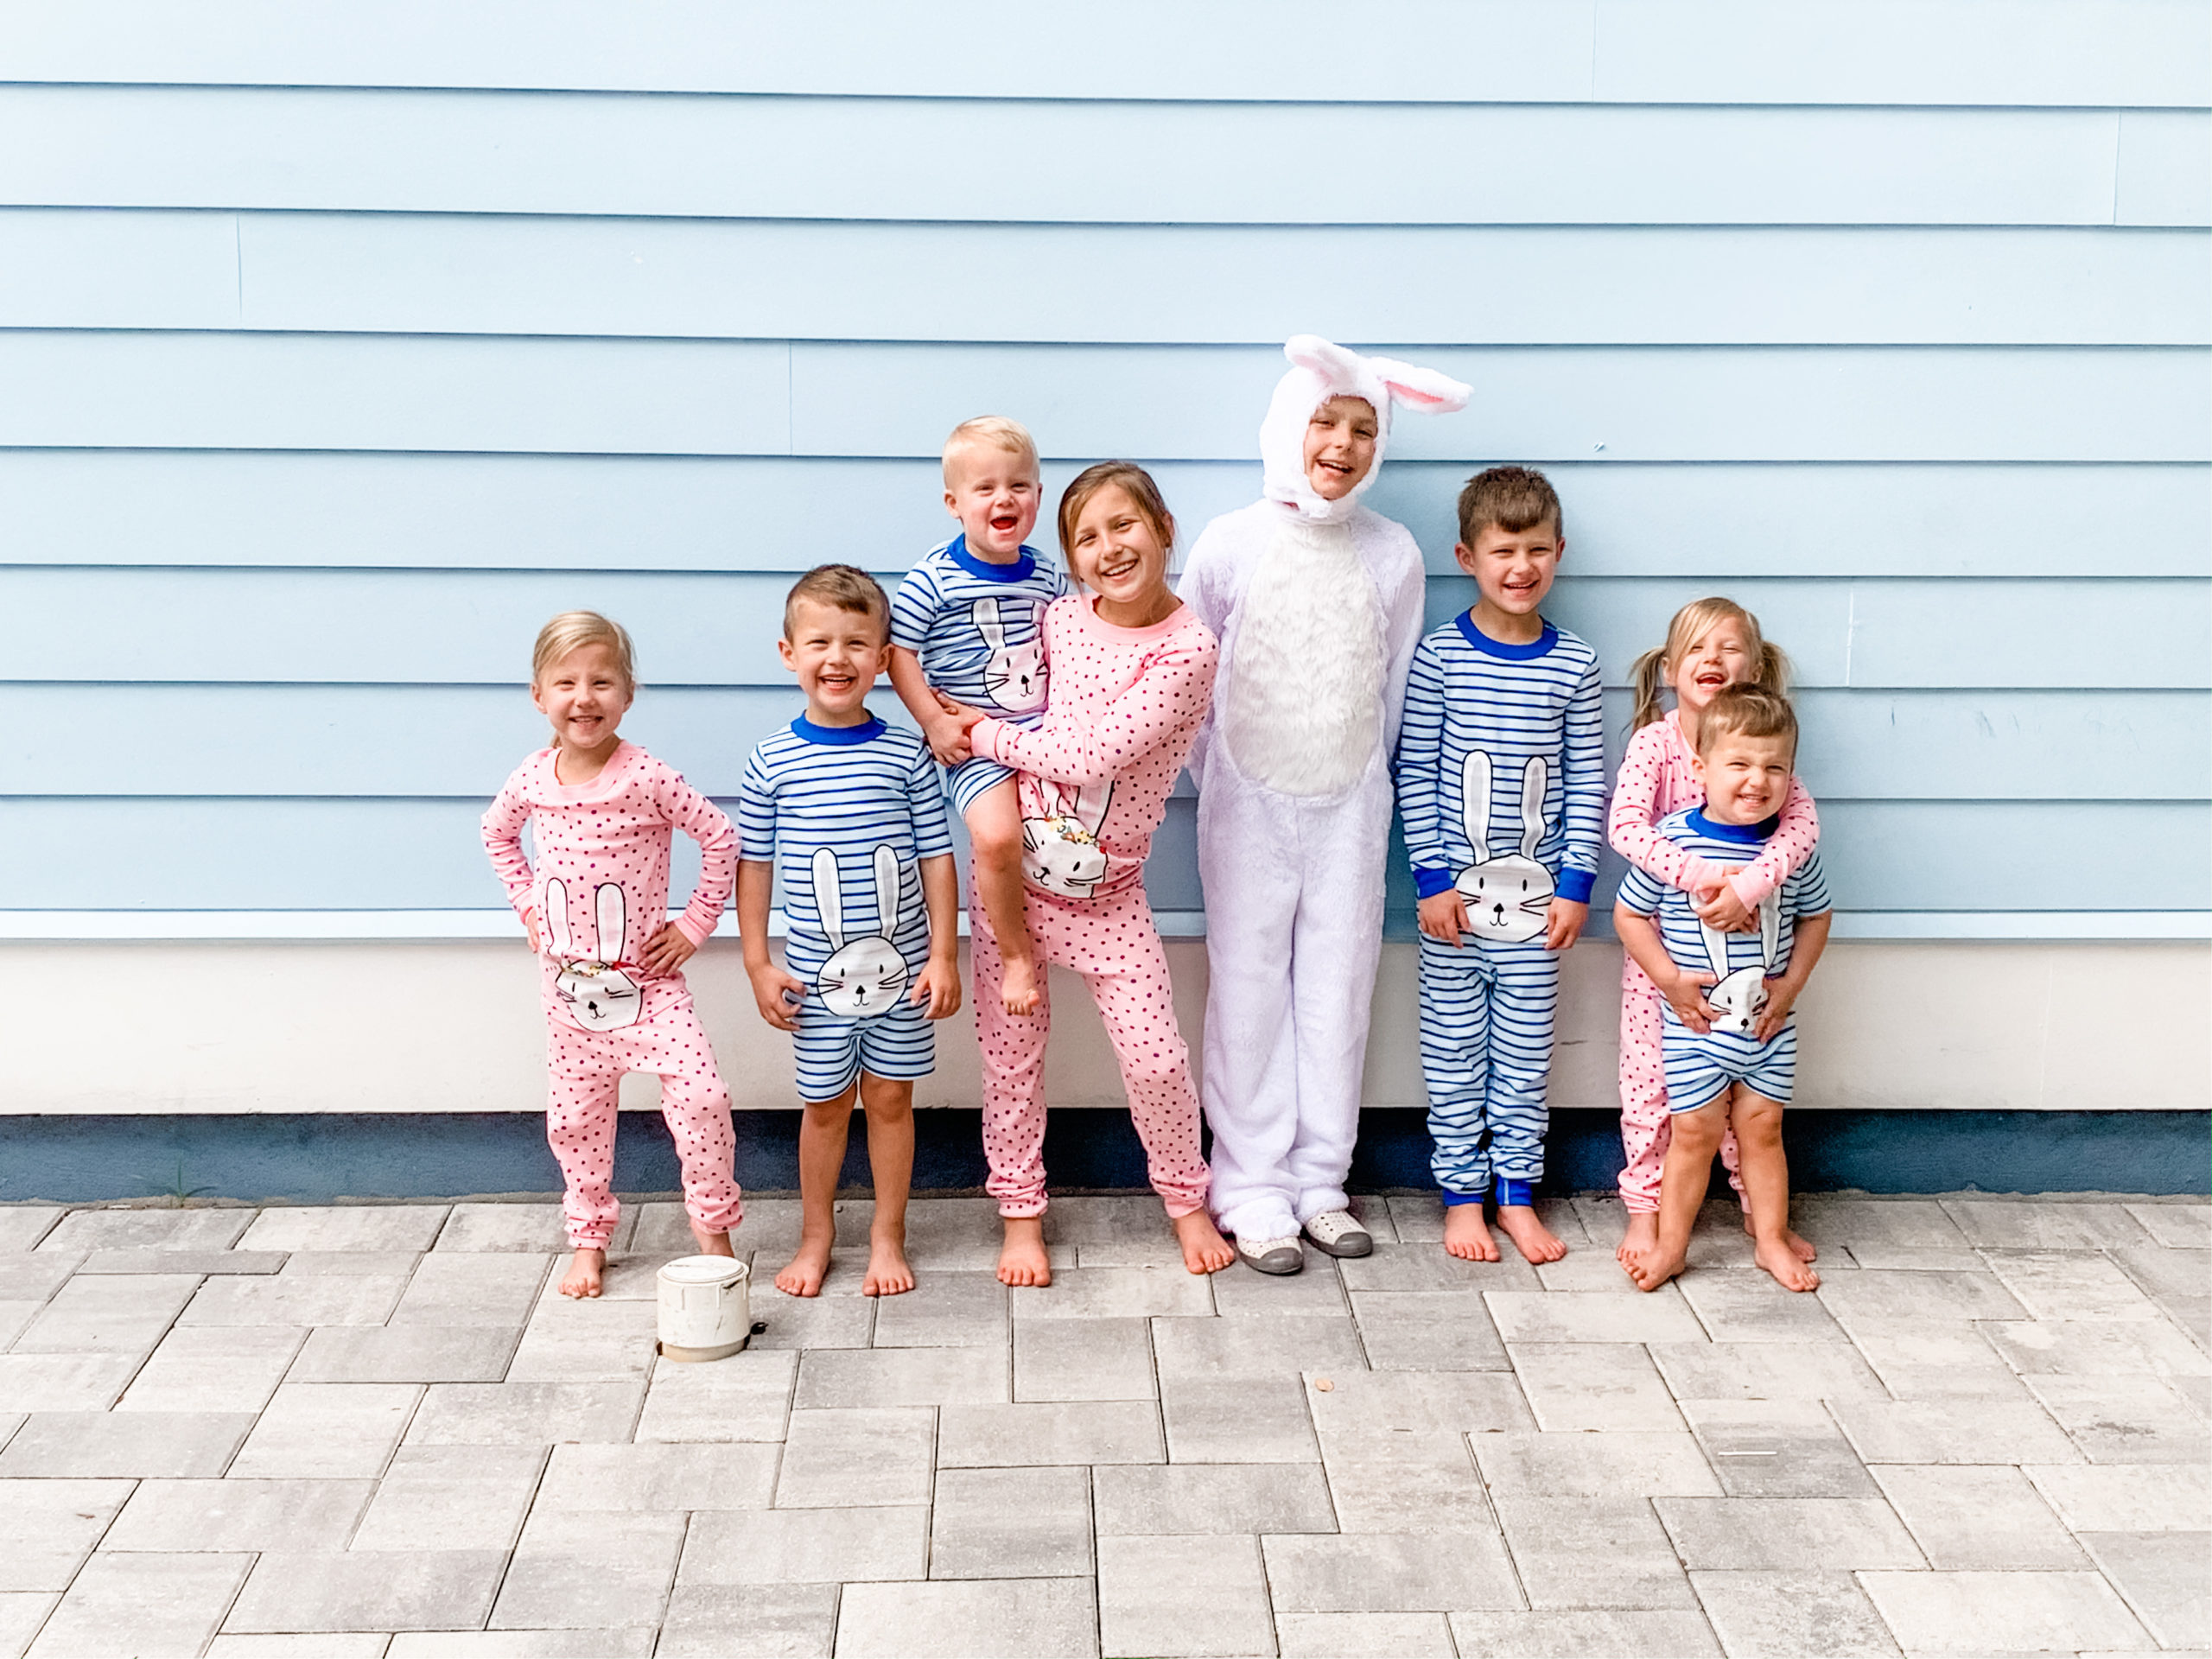 Pajama Jam with Hanna Andersson - Showit Blog